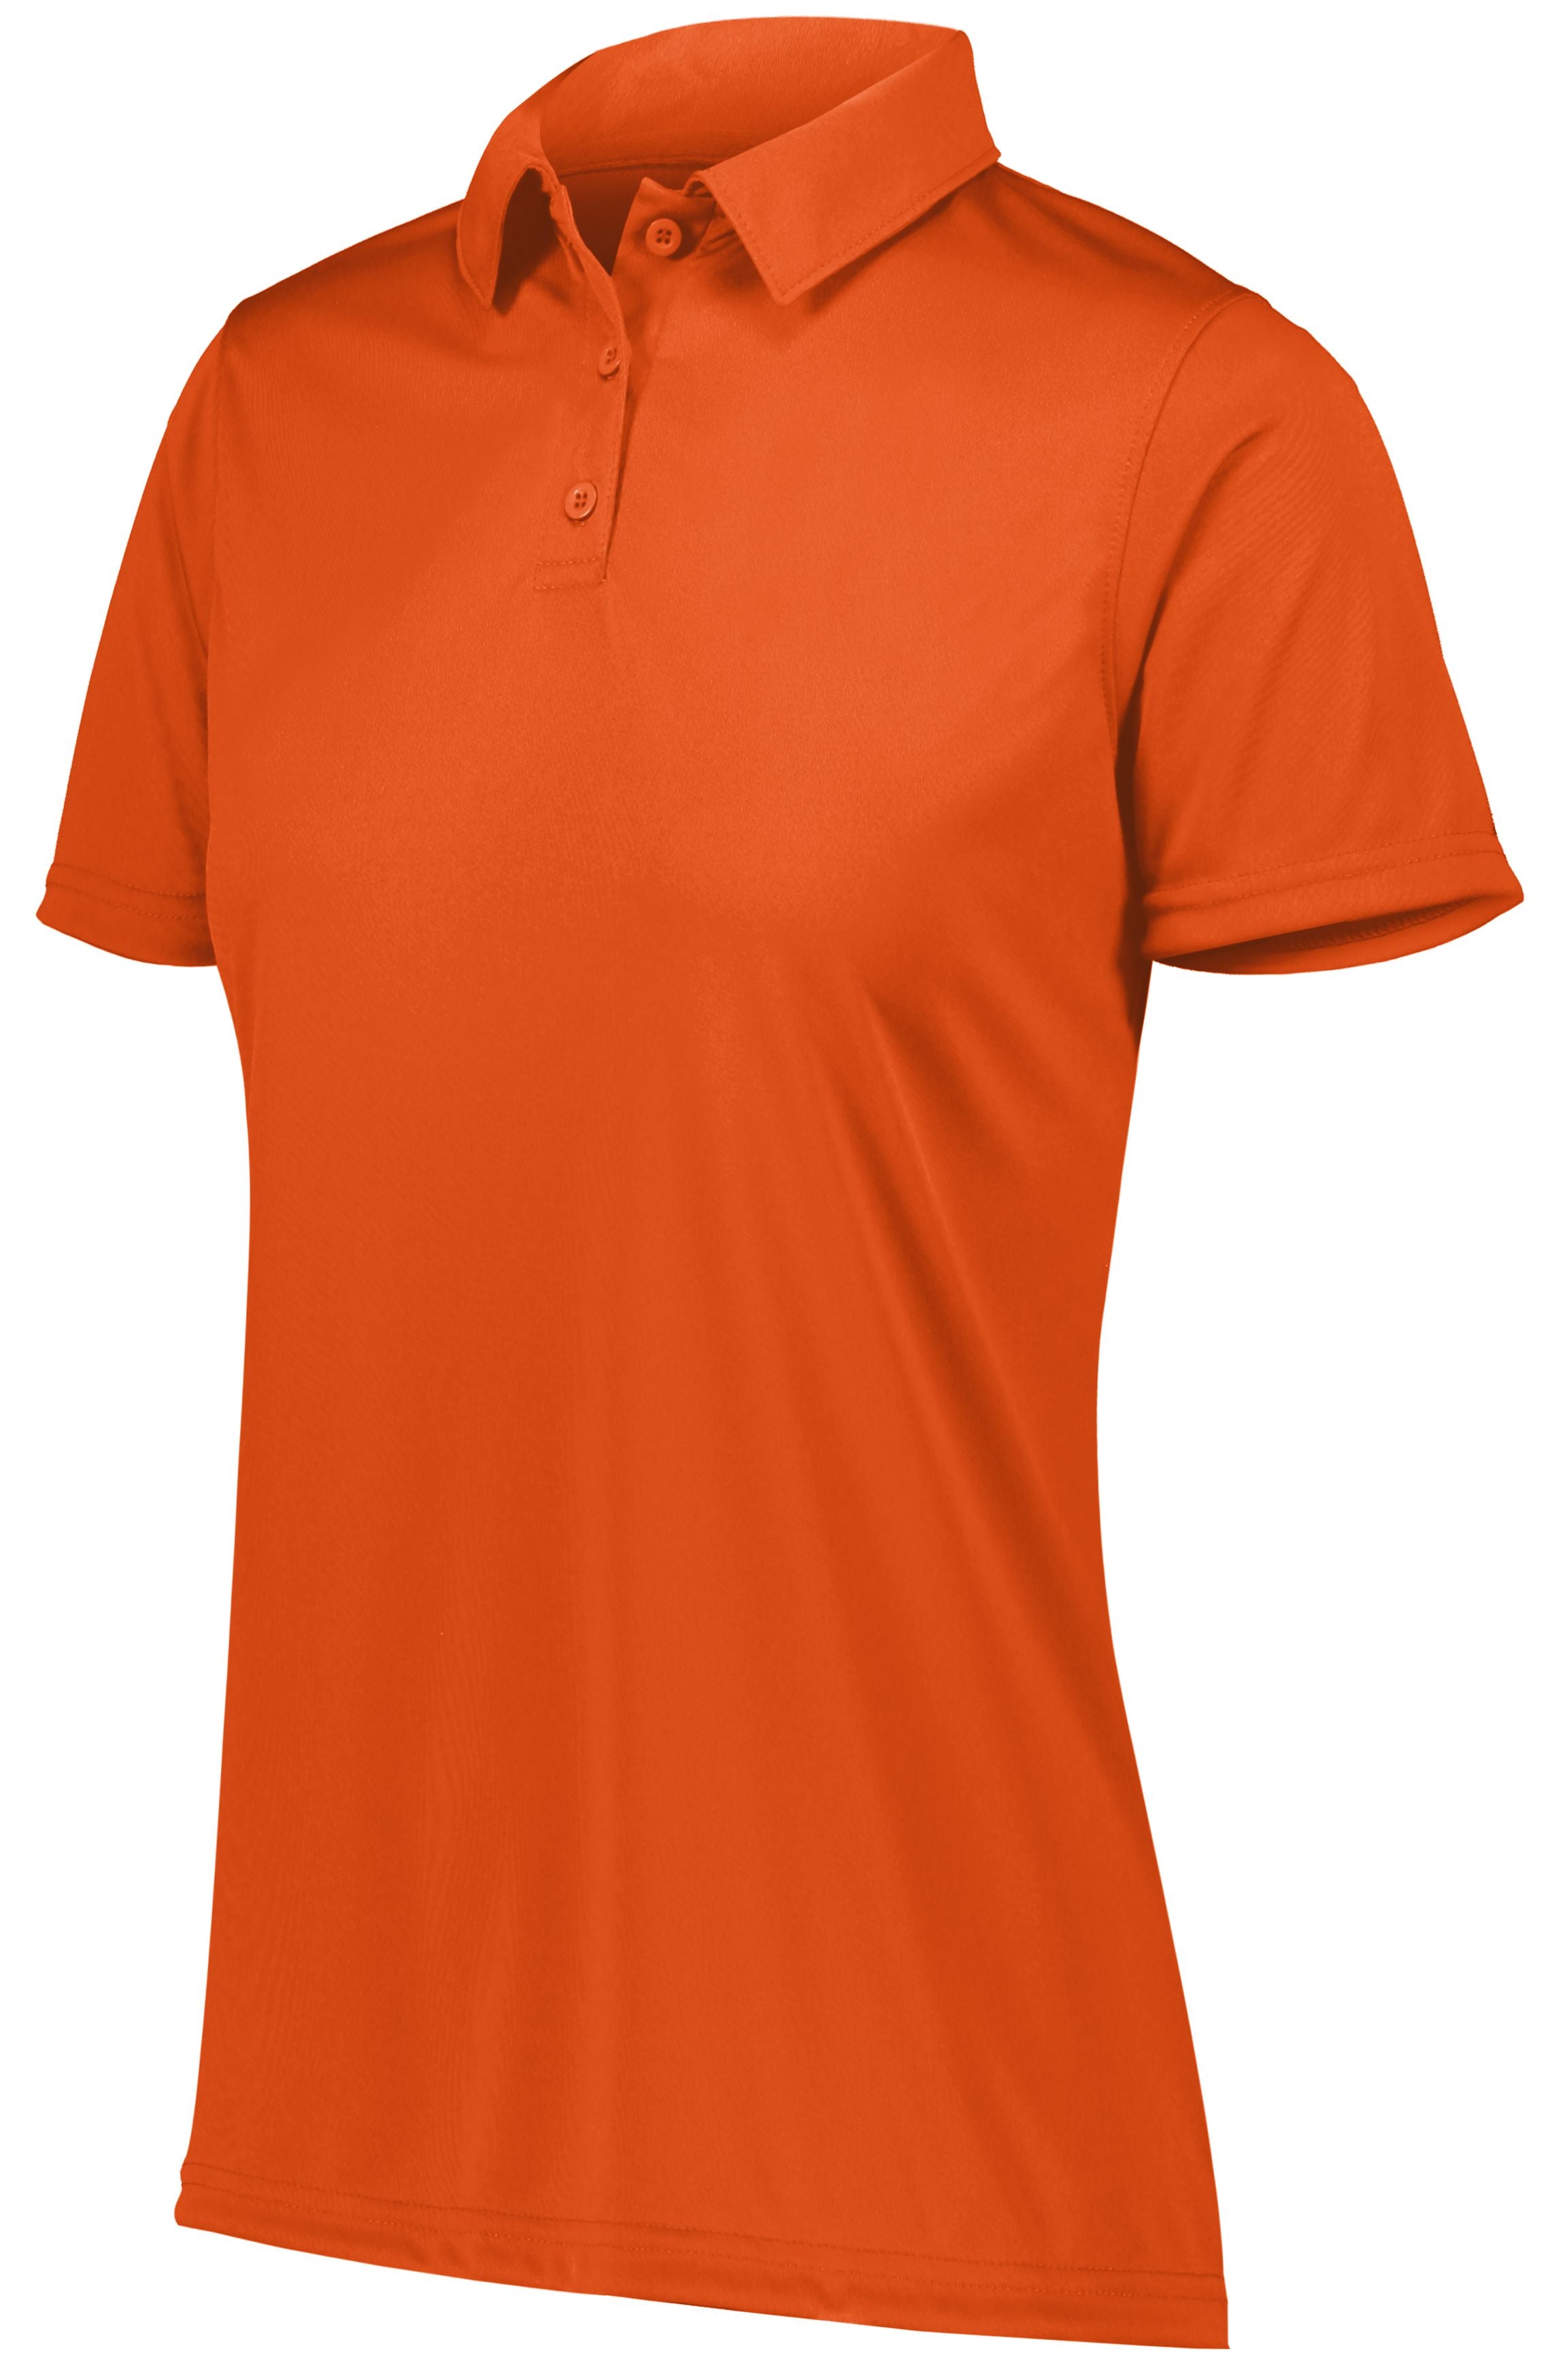 Augusta Sportswear Ladies Vital Polo in Orange  -Part of the Ladies, Ladies-Polo, Polos, Augusta-Products, Shirts product lines at KanaleyCreations.com